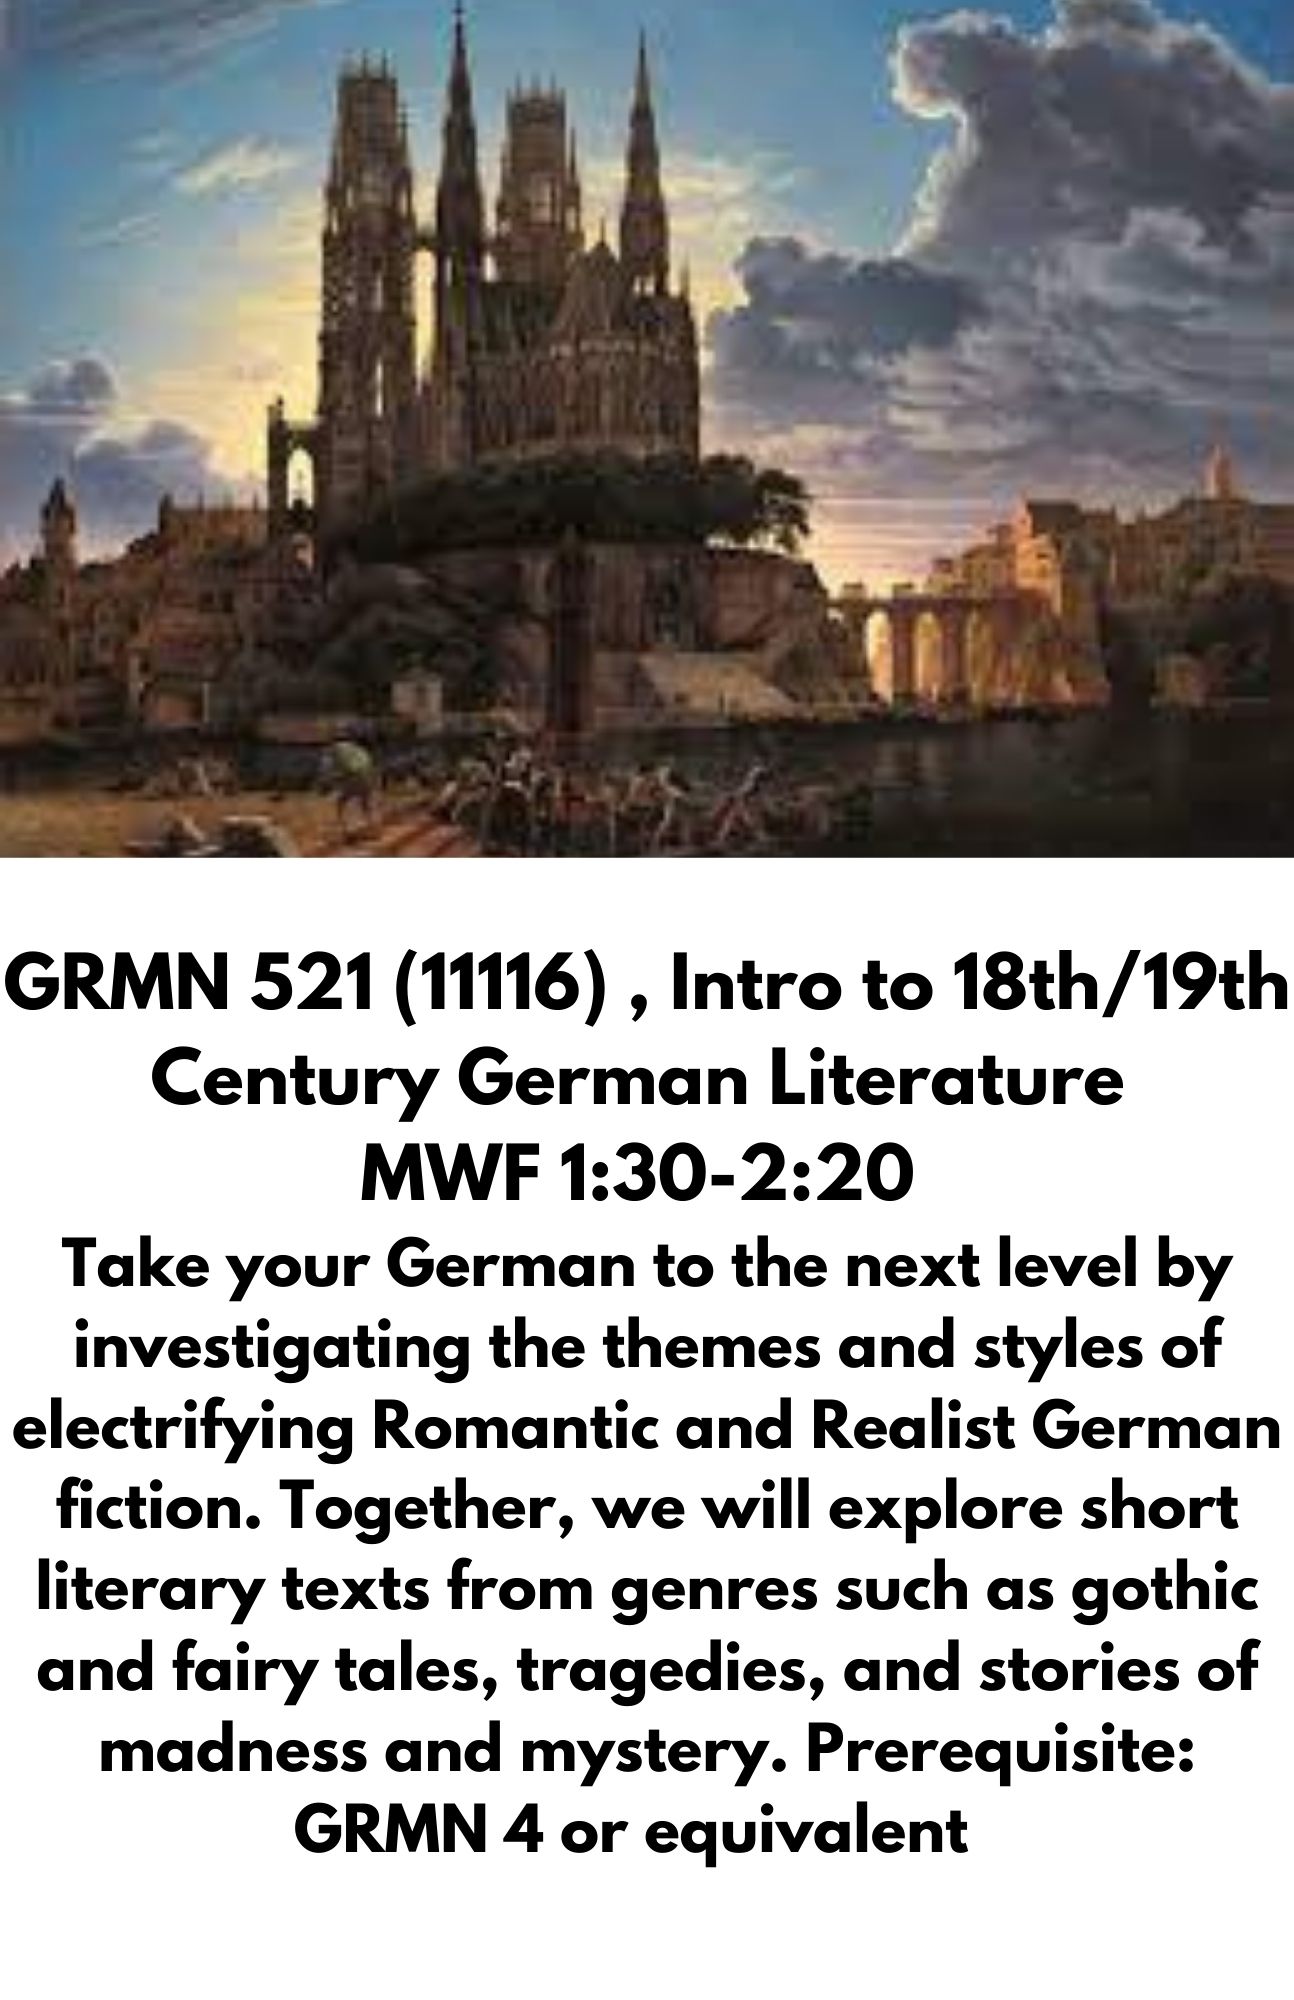 GRMN 521 (11116) , Intro to 18th/19th Century German Literature  MWF 1:30-2:20  Take your German to the next level by investigating the themes and styles of electrifying Romantic and Realist German fiction. Together, we will explore short literary texts from genres such as gothic and fairy tales, tragedies, and stories of madness and mystery. Prerequisite: GRMN 4 or equivalent  